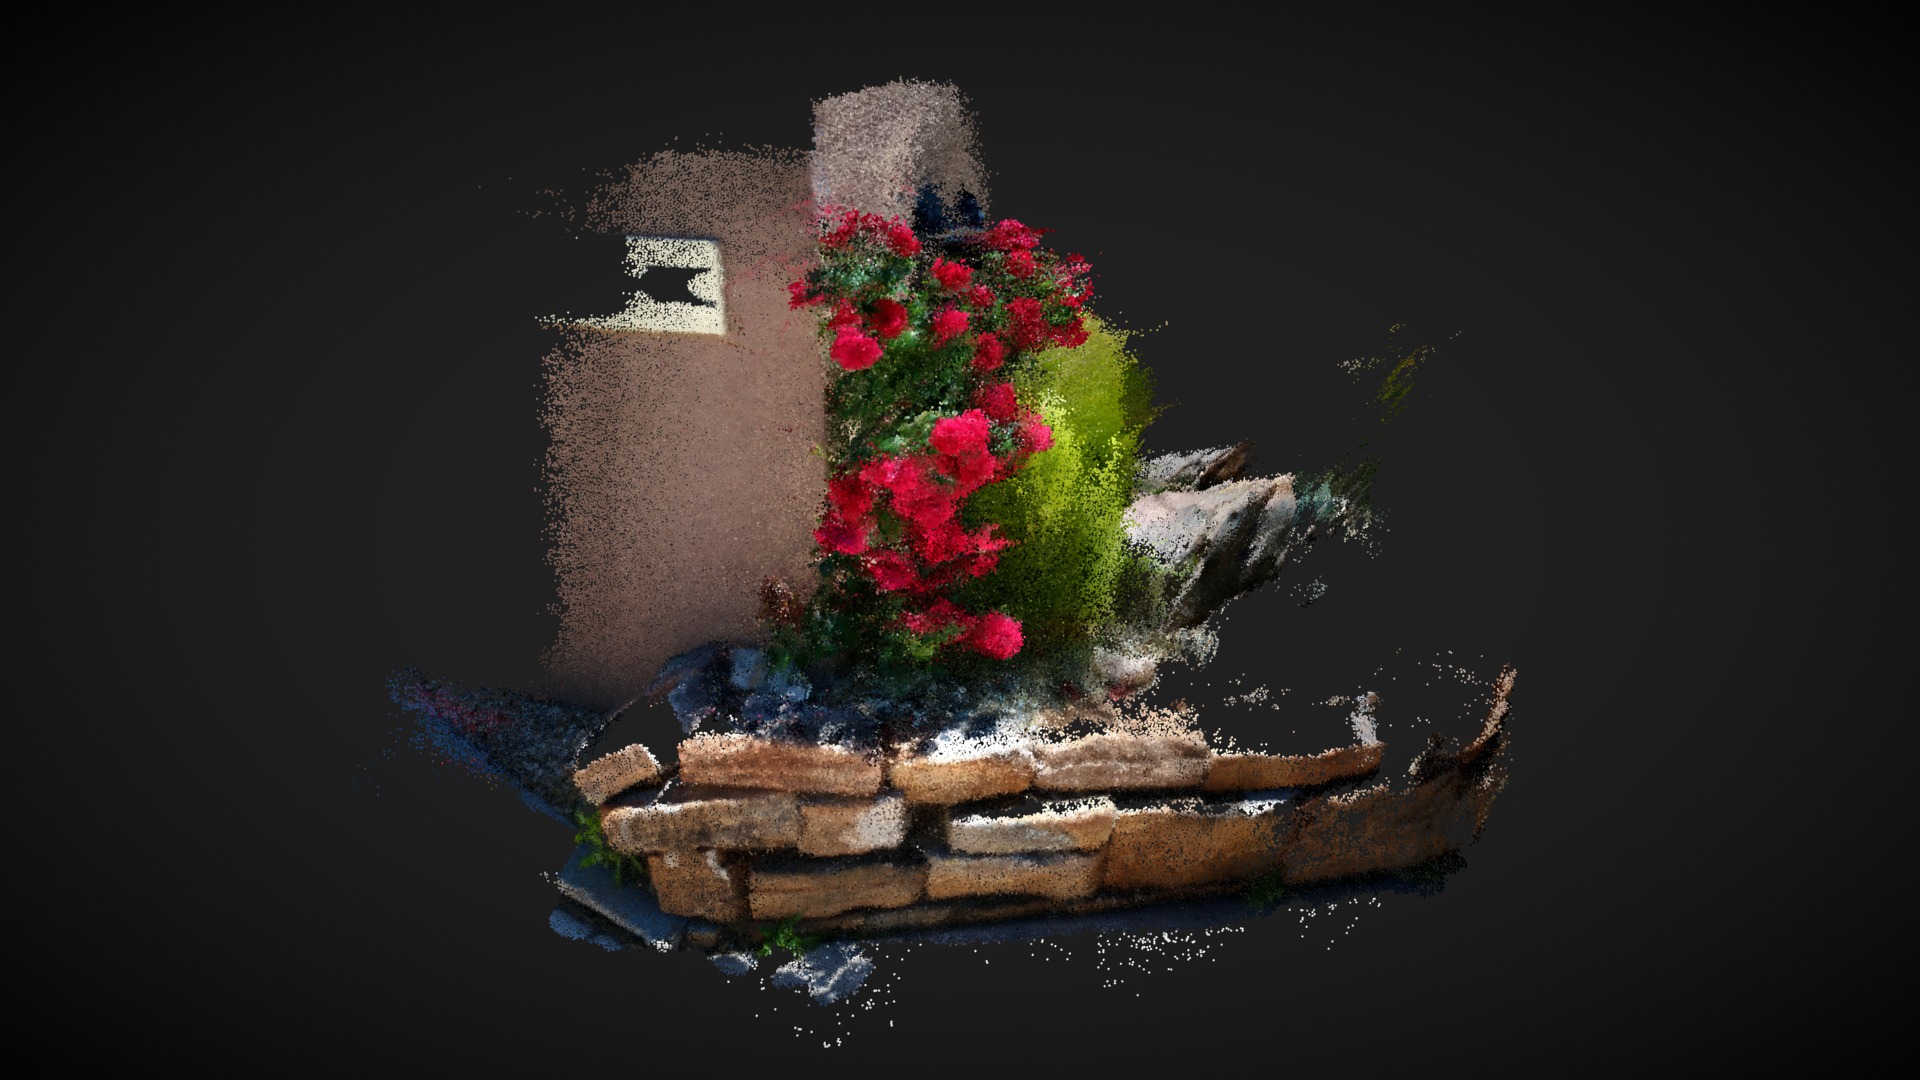 3D model Roses - This is a 3D model of the Roses. The 3D model is about a gingerbread house with a tree on top.